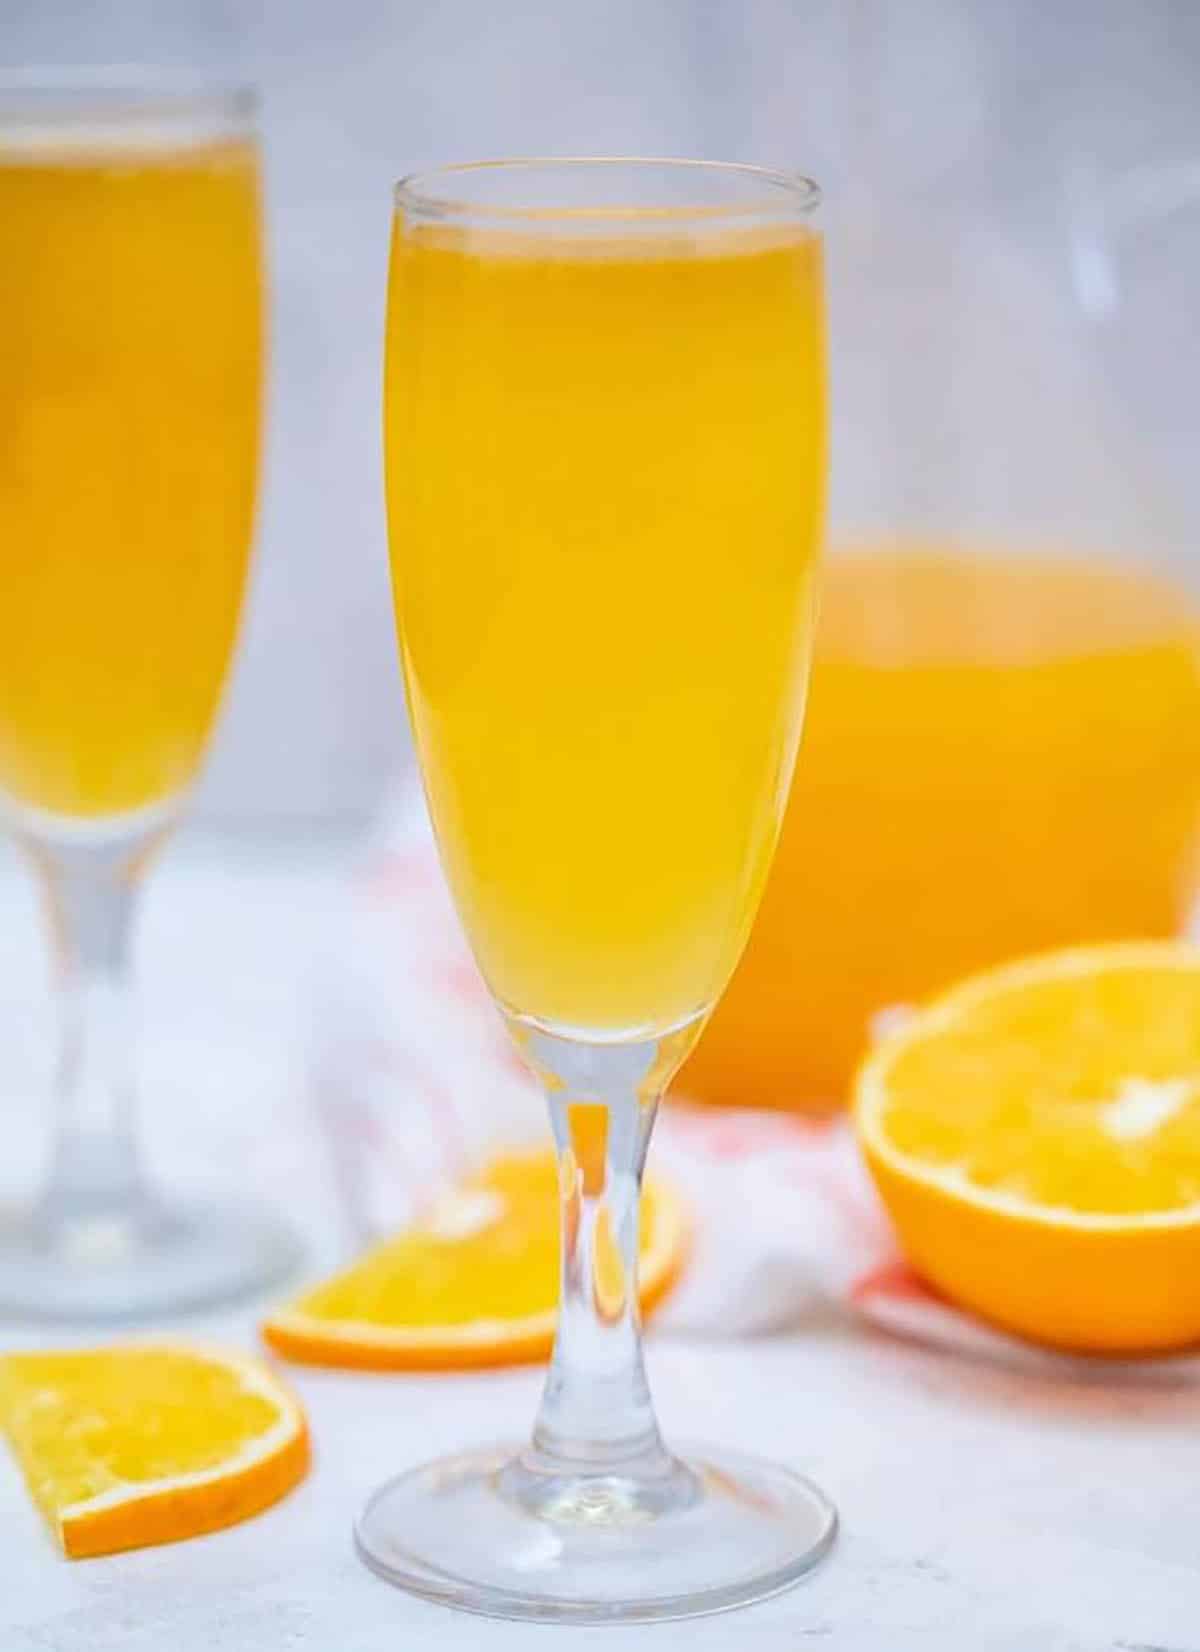 The Best Mimosa in a wine glass